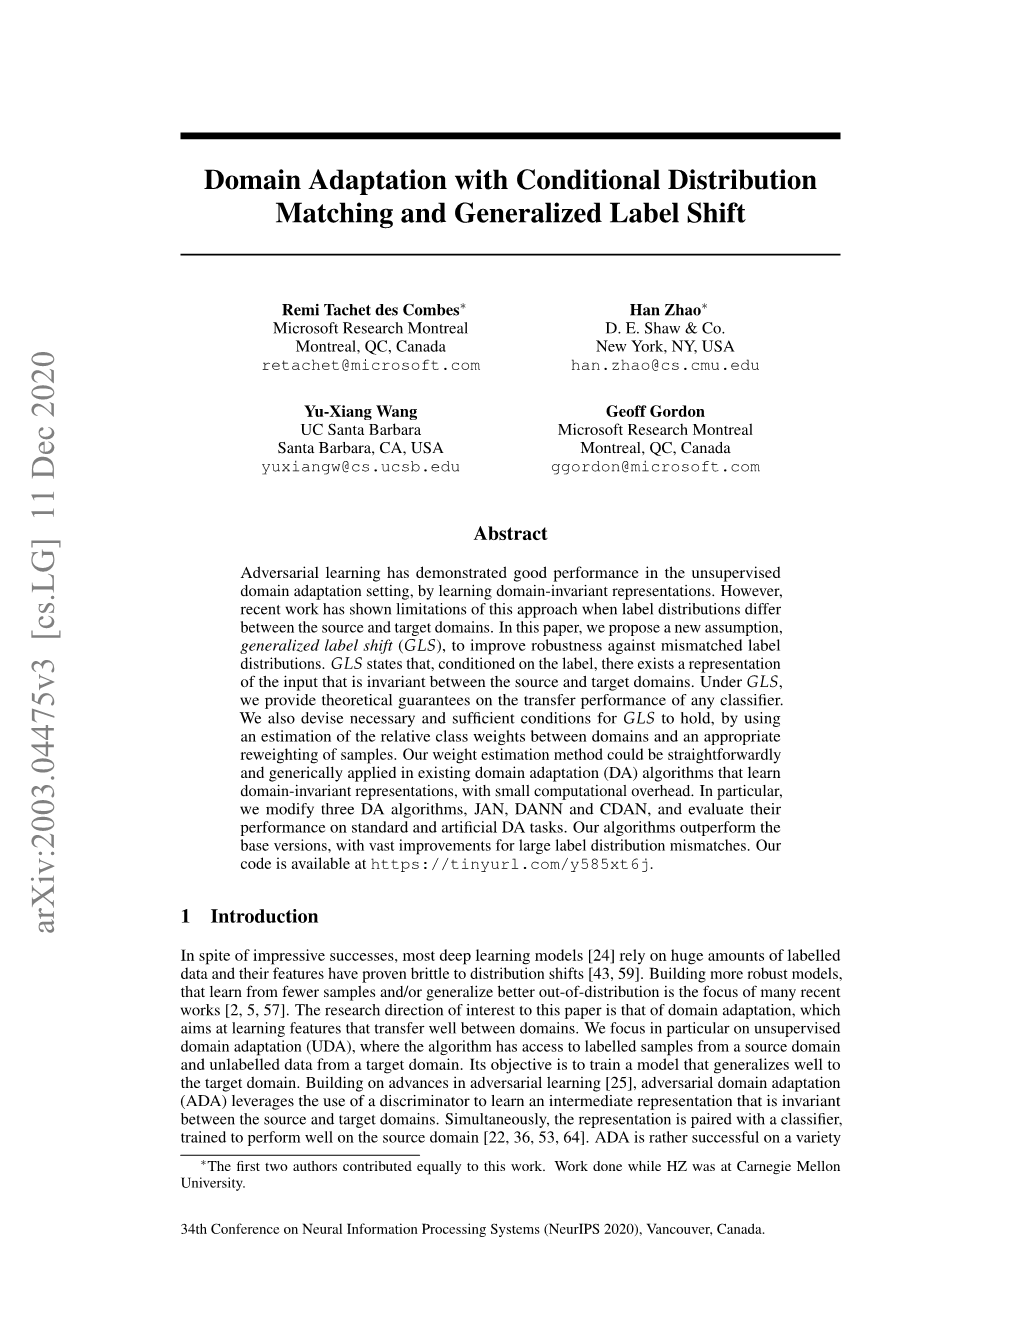 Domain Adaptation with Conditional Distribution Matching and Generalized Label Shift